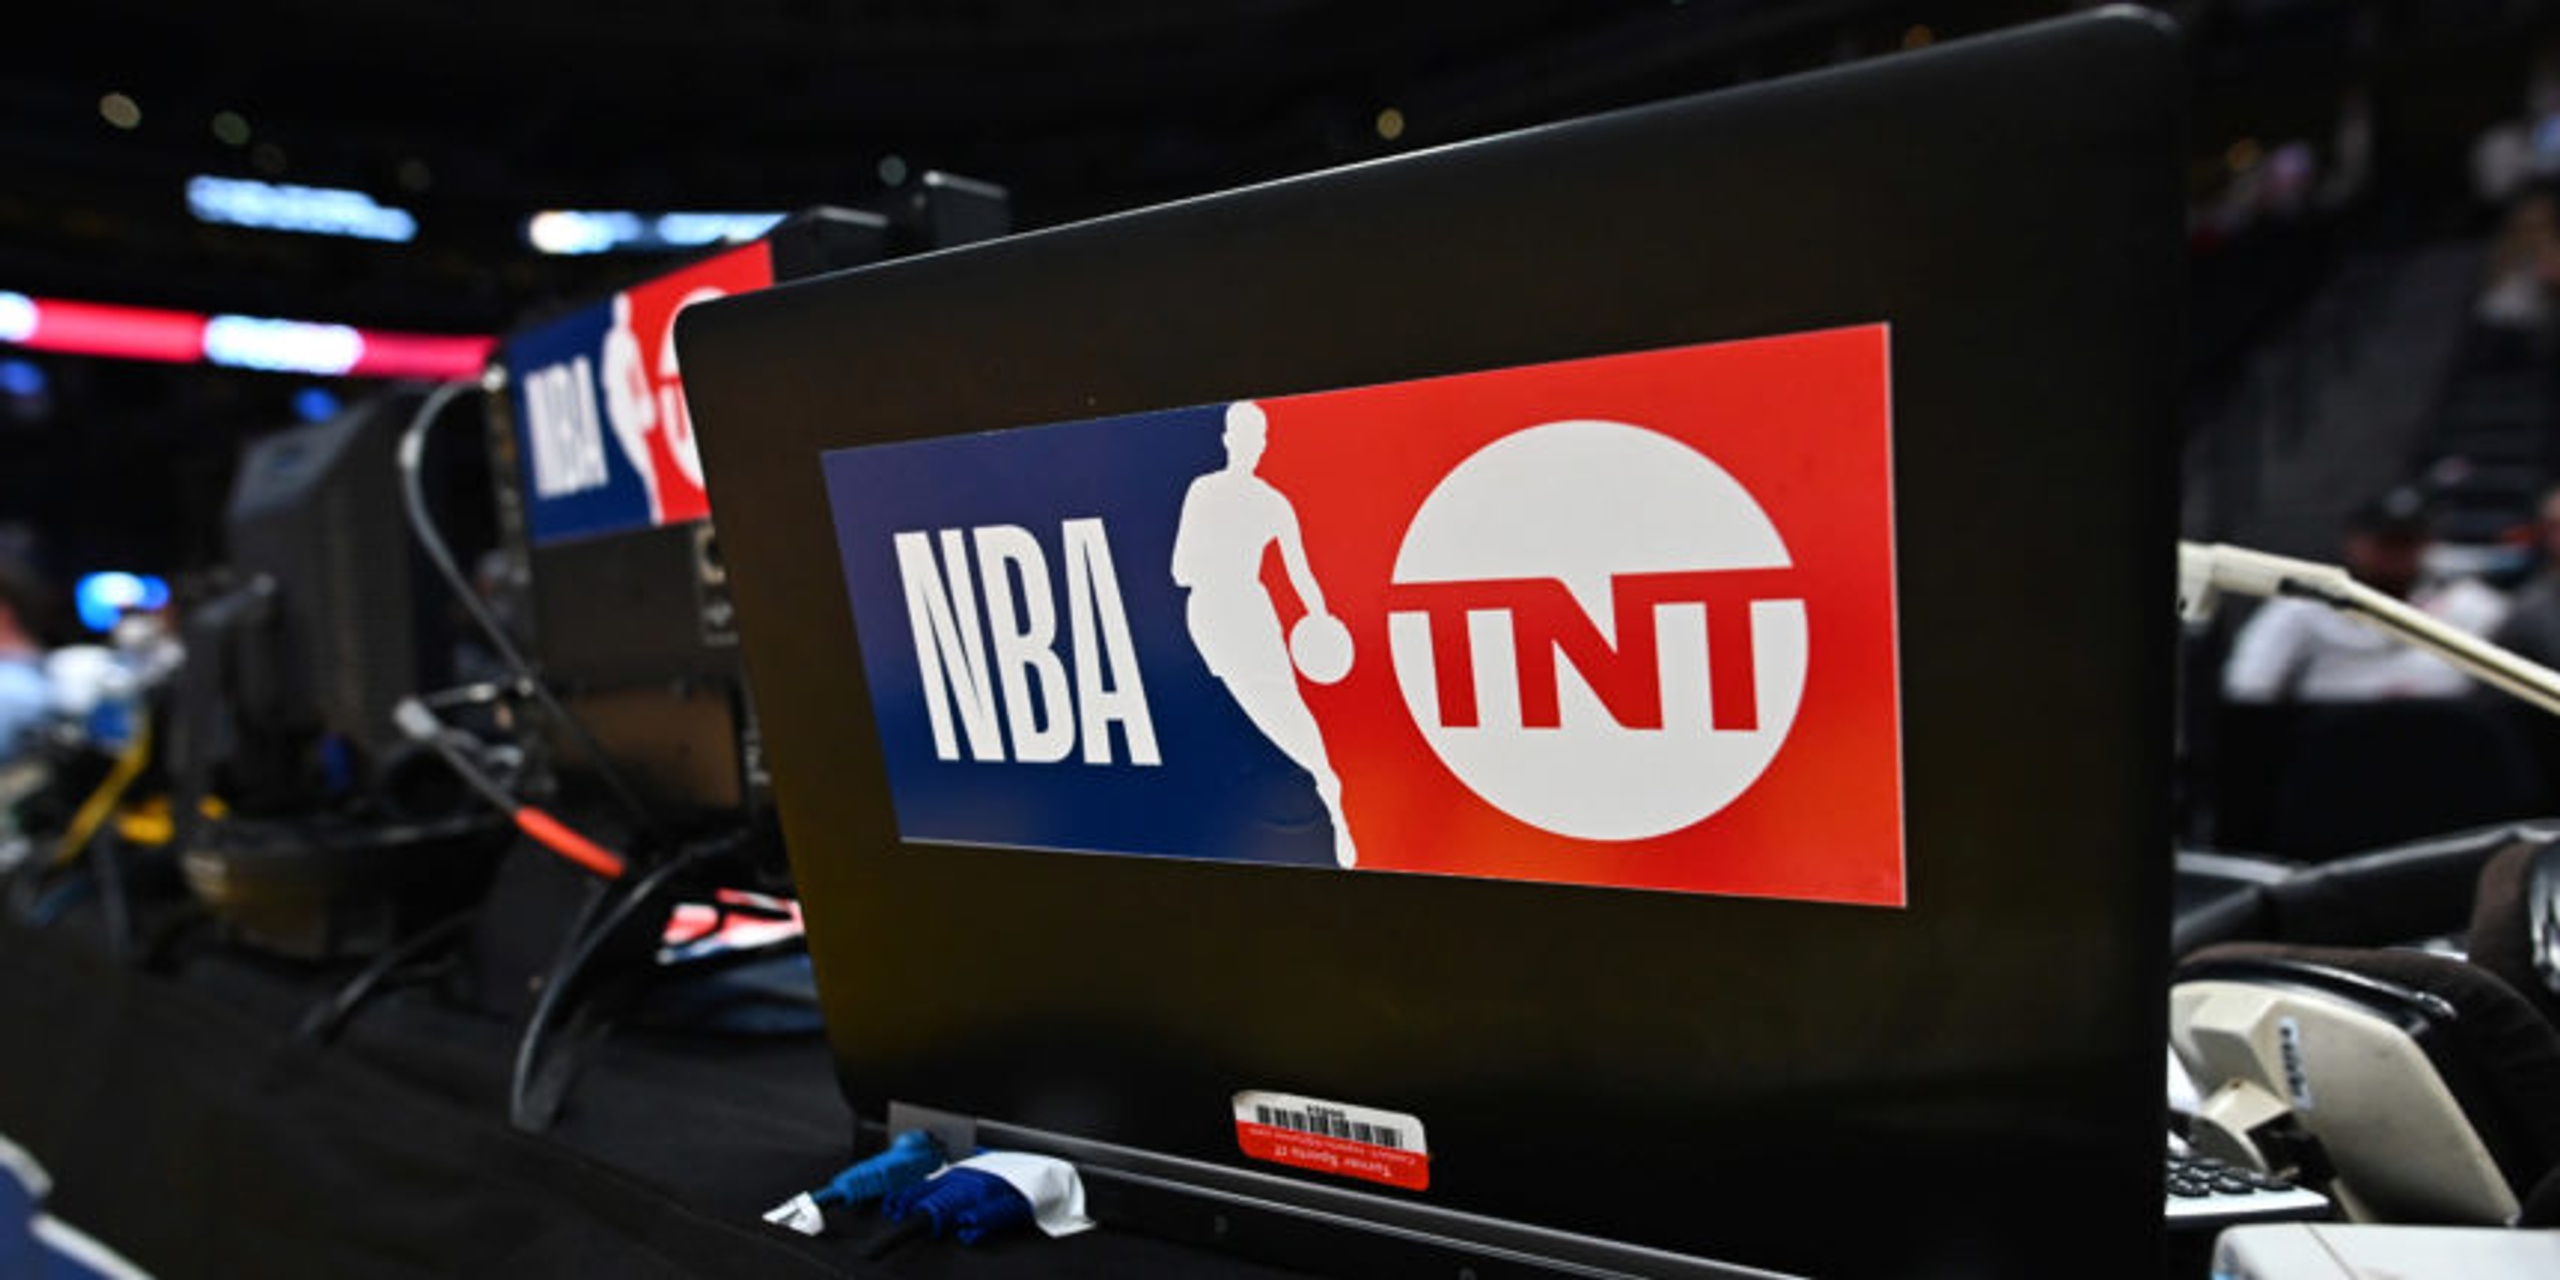 Which markets deliver the highest ratings for national NBA games?